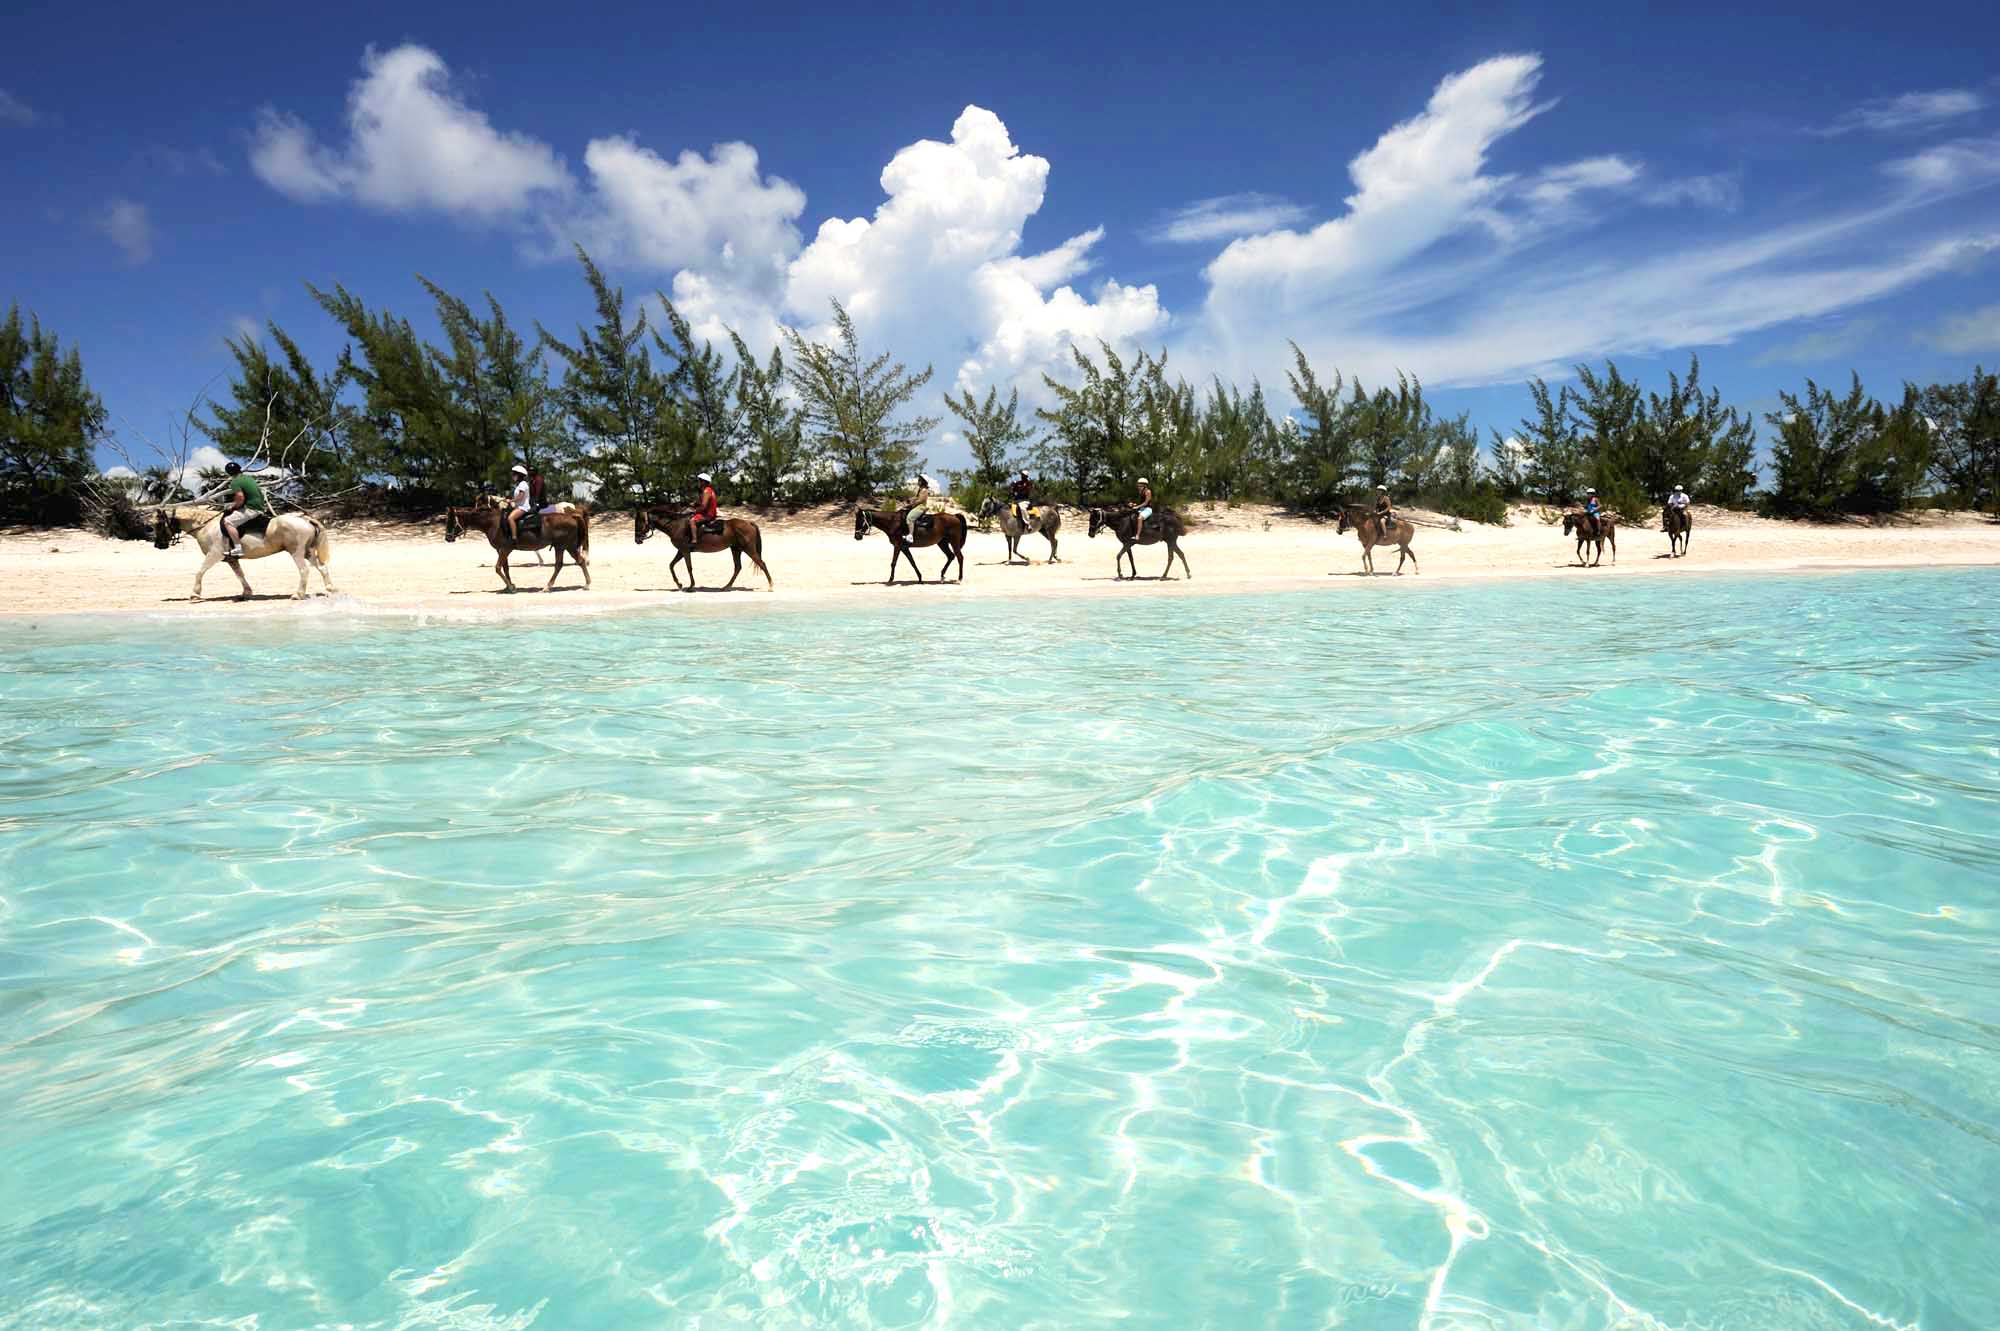 Horseback riding, hiking and nature walks are as popular as the beaches and snorkeling at Half Moon Cay, one of about 700 islands that make up the Bahamas.